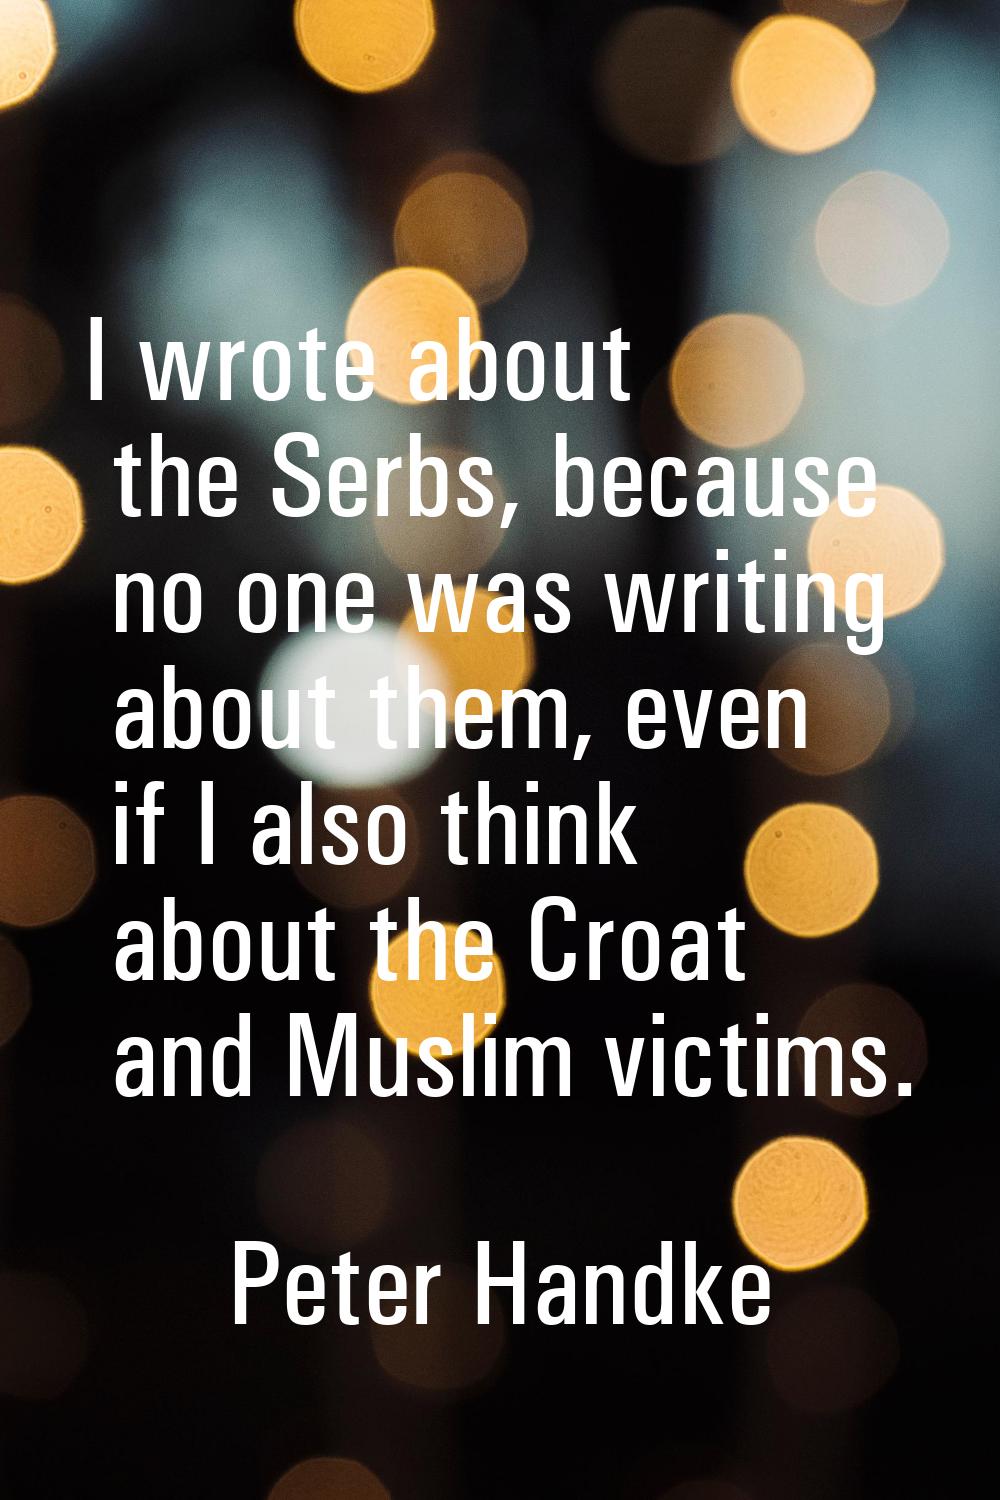 I wrote about the Serbs, because no one was writing about them, even if I also think about the Croa